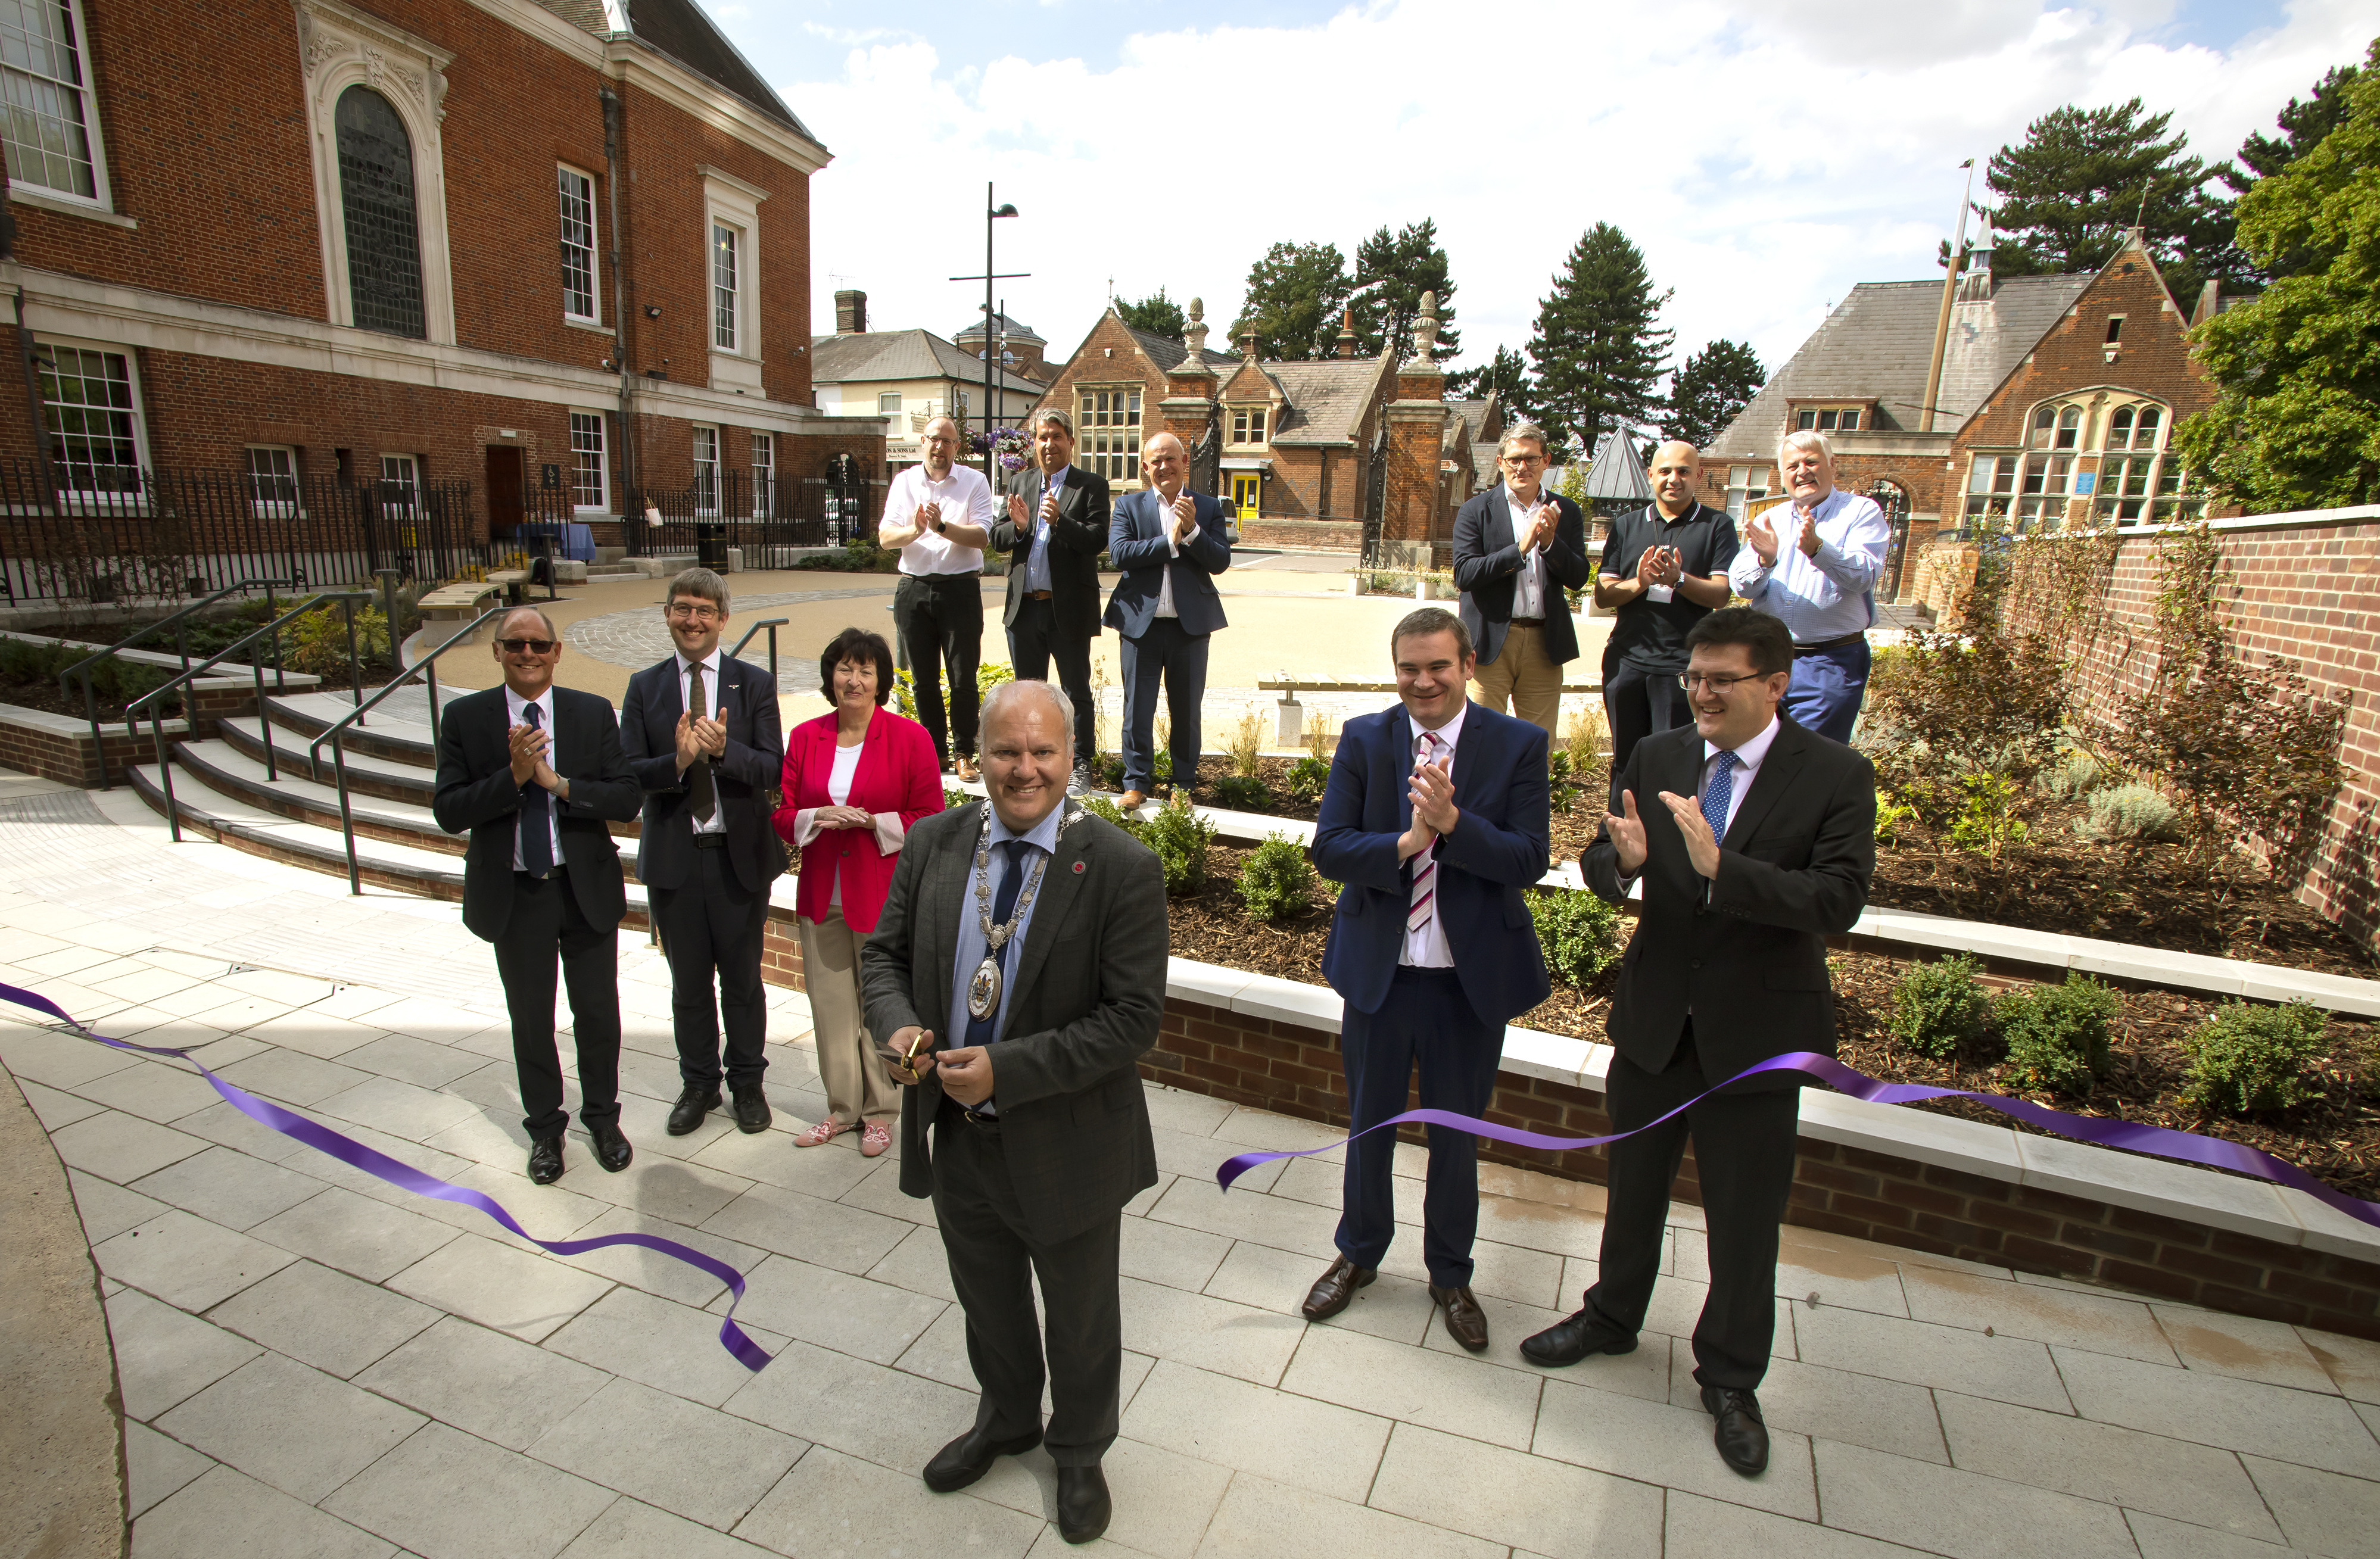 Chairman Cllr Andrew Hensman cutting the ribbon at the garden behind the Town Hall